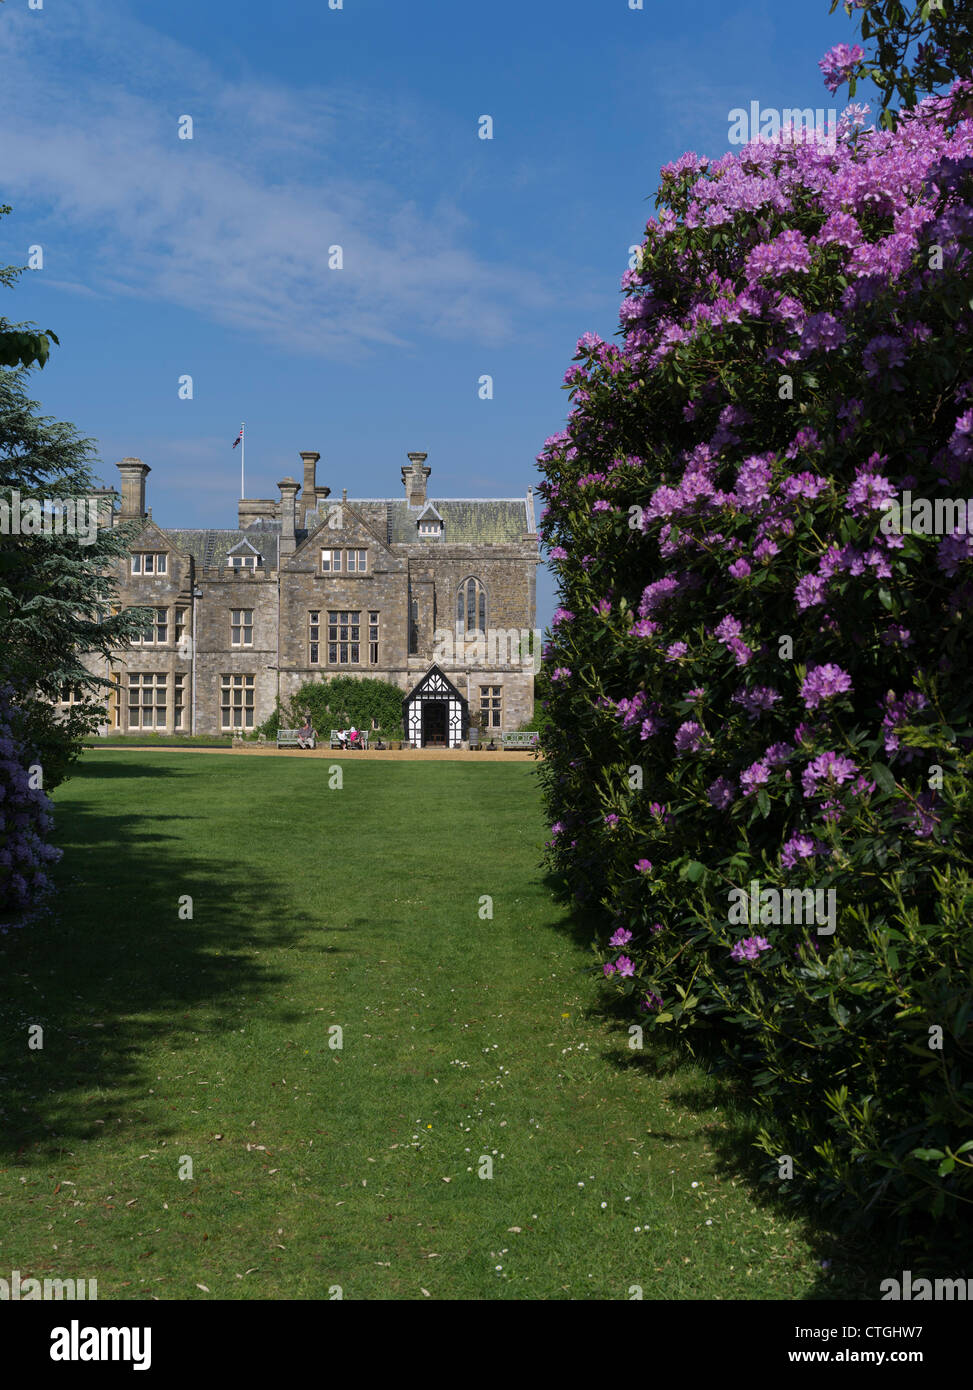 dh Home of Lord Montagu BEAULIEU PALACE HAMPSHIRE UK Stately Mansion house estate english country manor uk garden rhododendron new forest Stock Photo